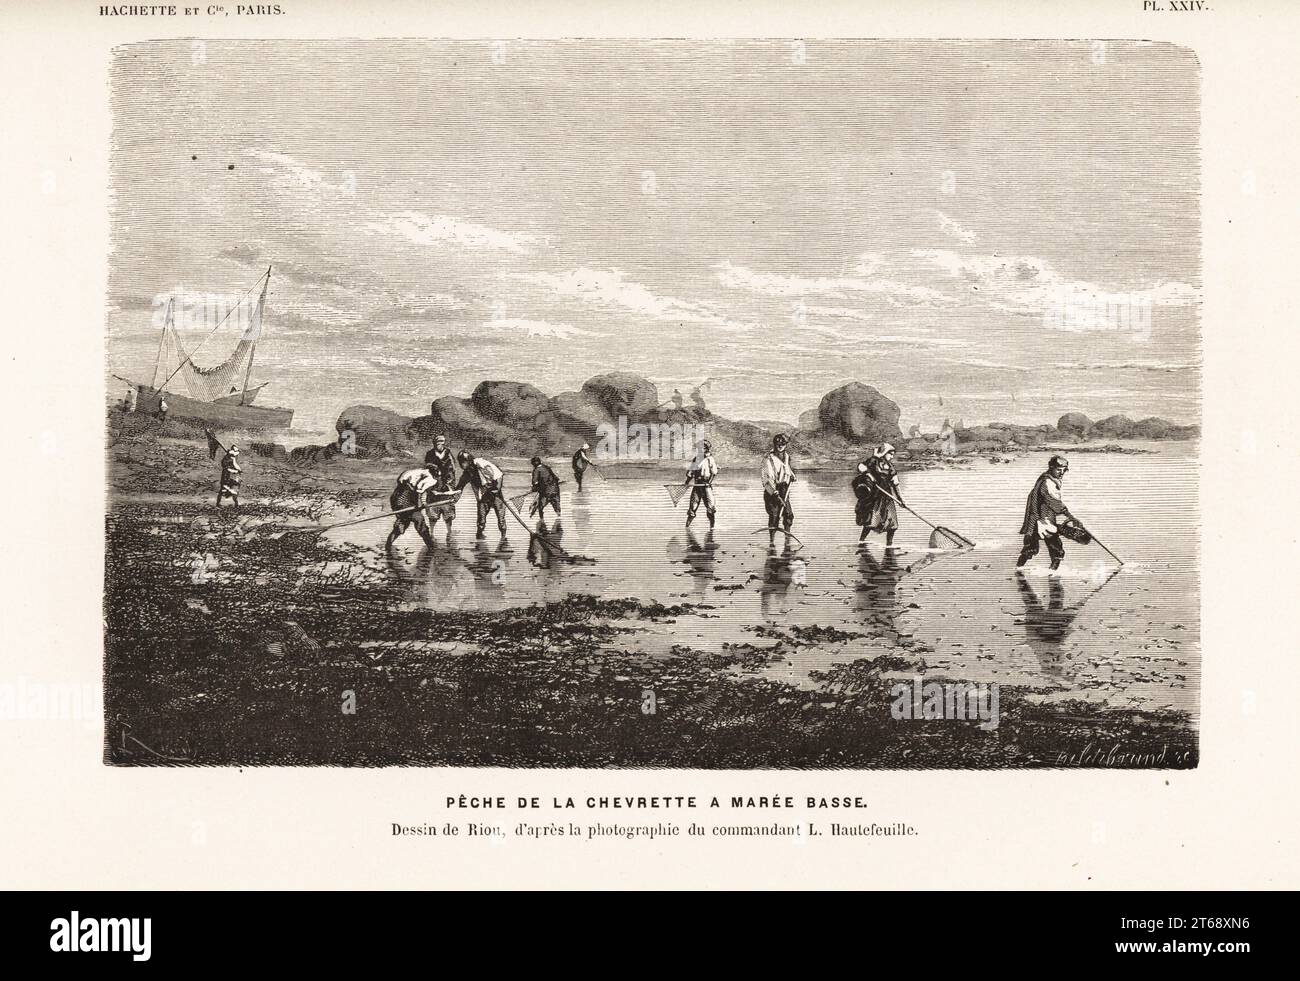 Shrimpers fishing for shrimps with nets at low tide. Peche de la chevrette a Maree Basse. Drawing by Edouard Riou after a photograph by L. Hautefeuille. Woodcut by Henri Hildibrand from Alfred Fredols Le Monde de la Mer, the World of the Sea, edited by Olivier Fredol, Librairie Hachette et. Cie., Paris, 1881. Alfred Fredol was the pseudonym of French zoologist and botanist Alfred Moquin-Tandon, 1804-1863. Stock Photo